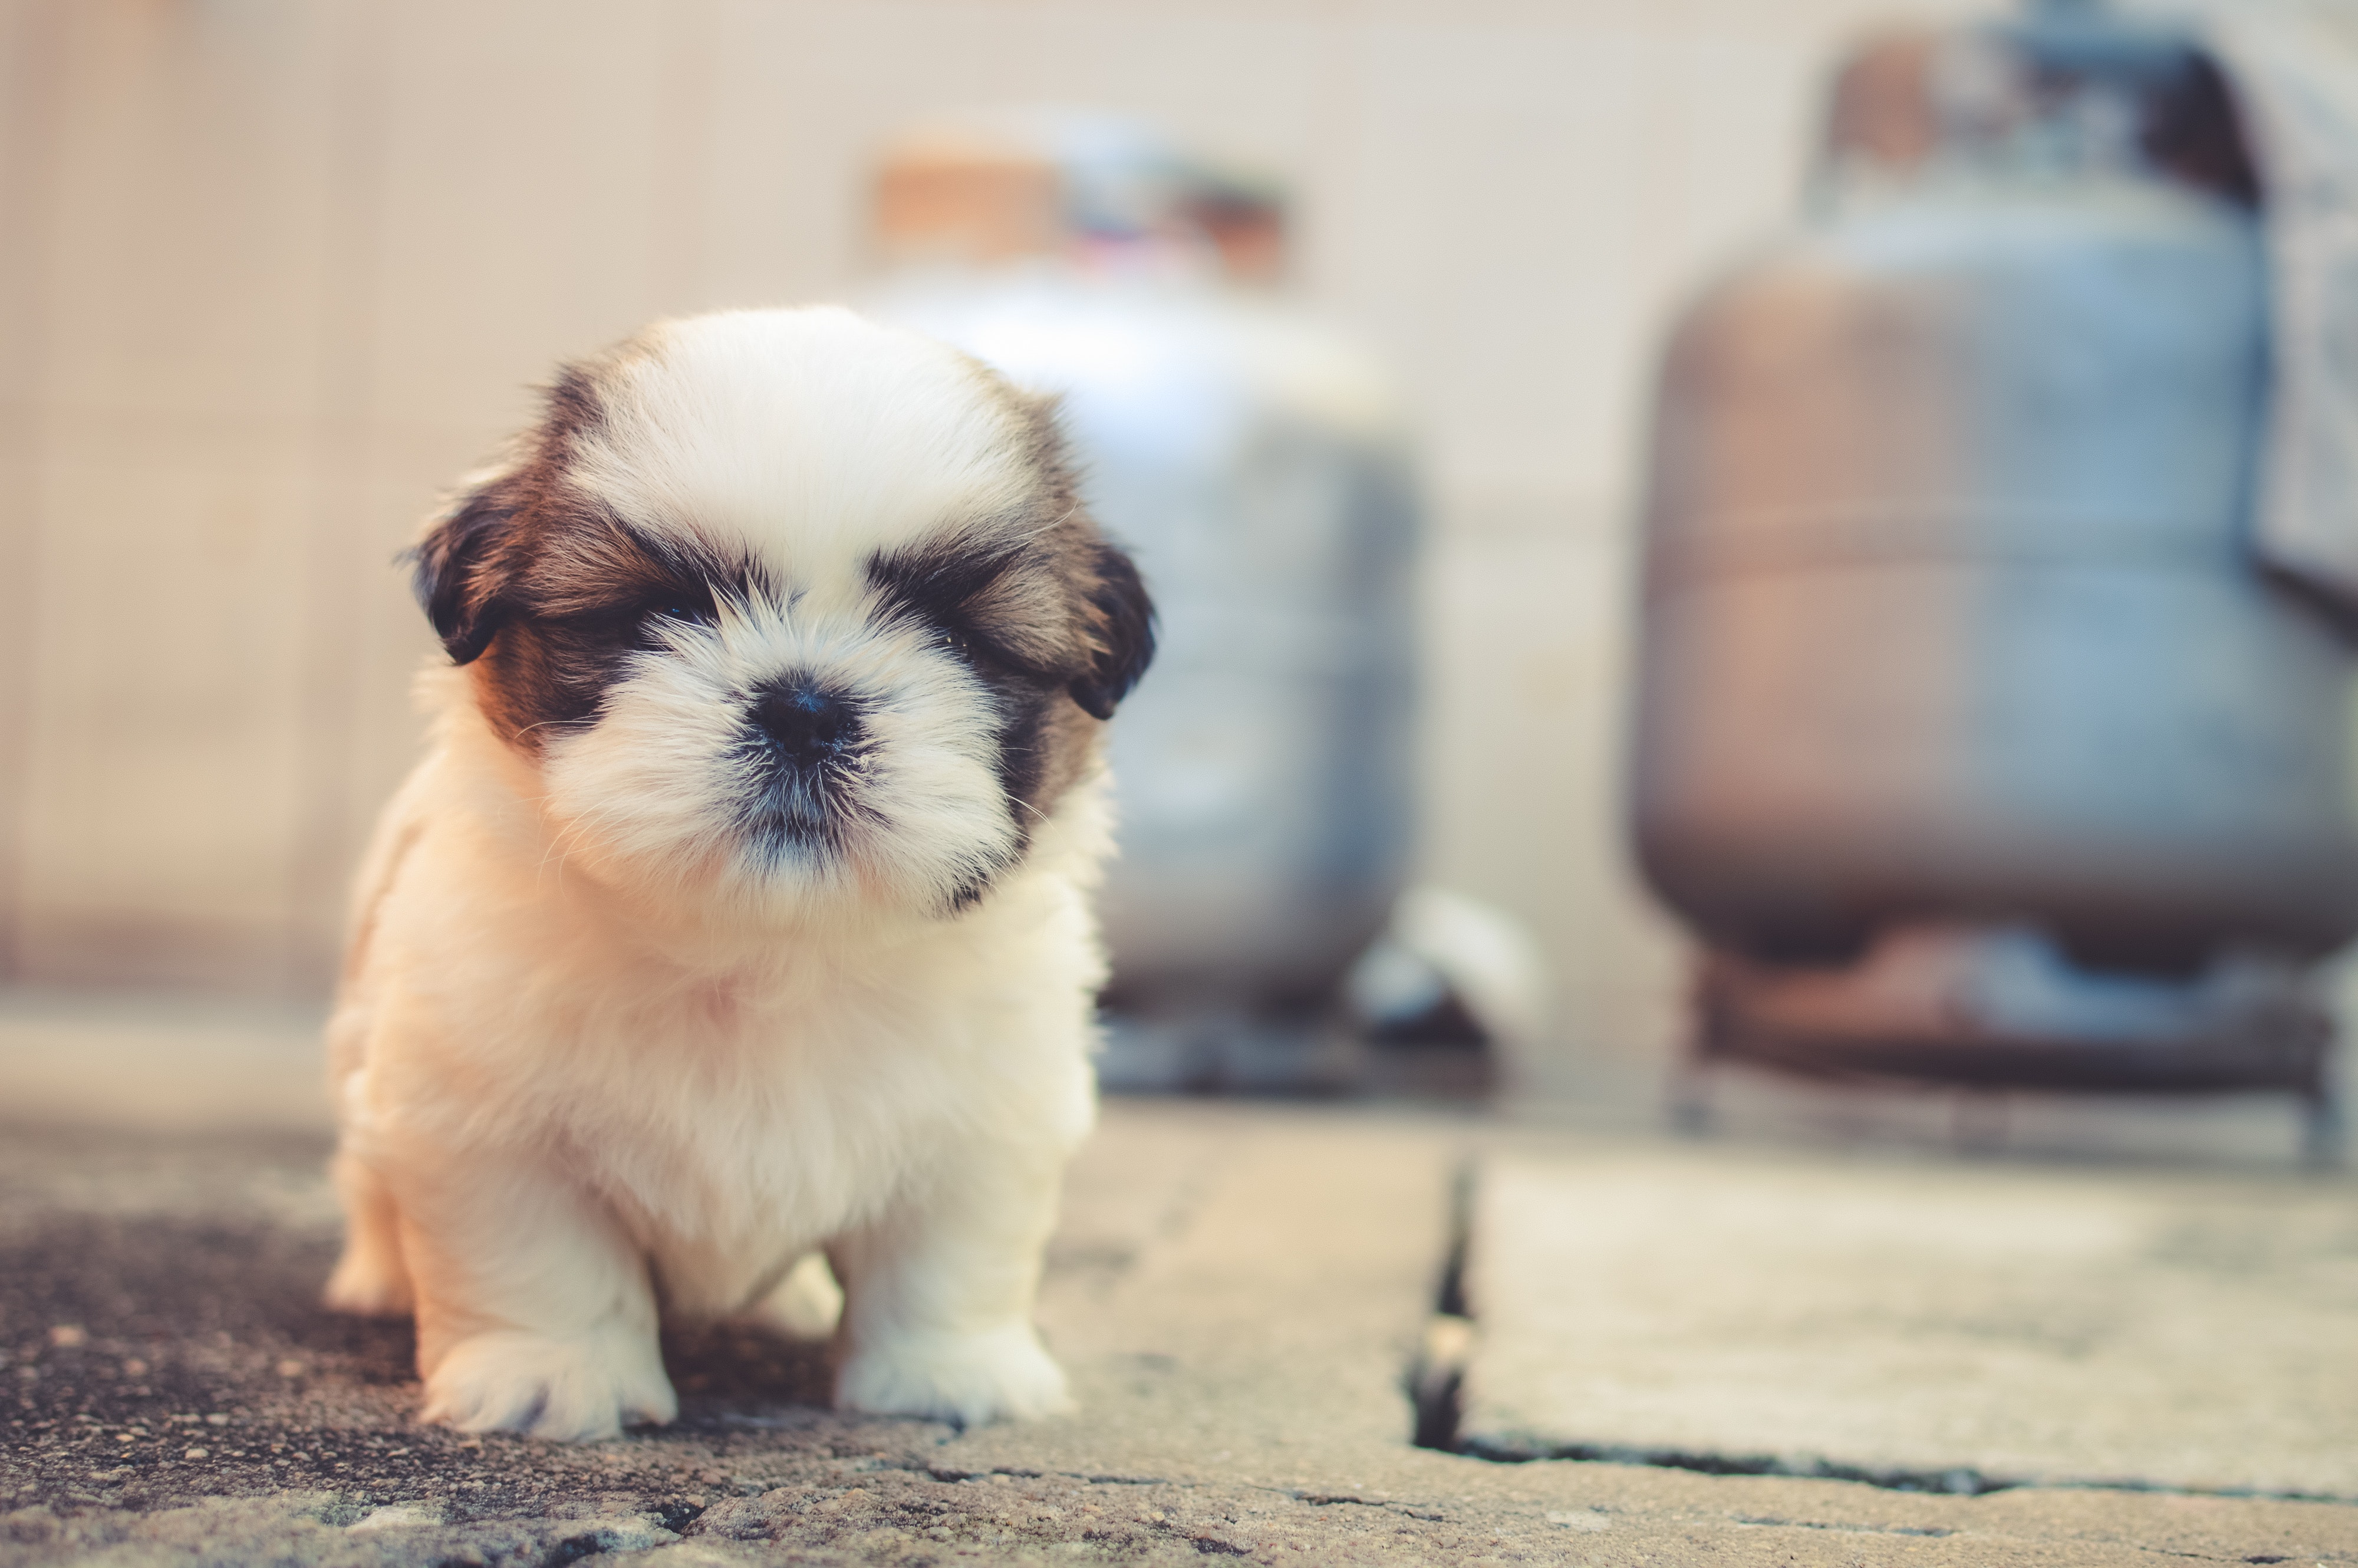 Puppy photos download the best free puppy stock photos hd images